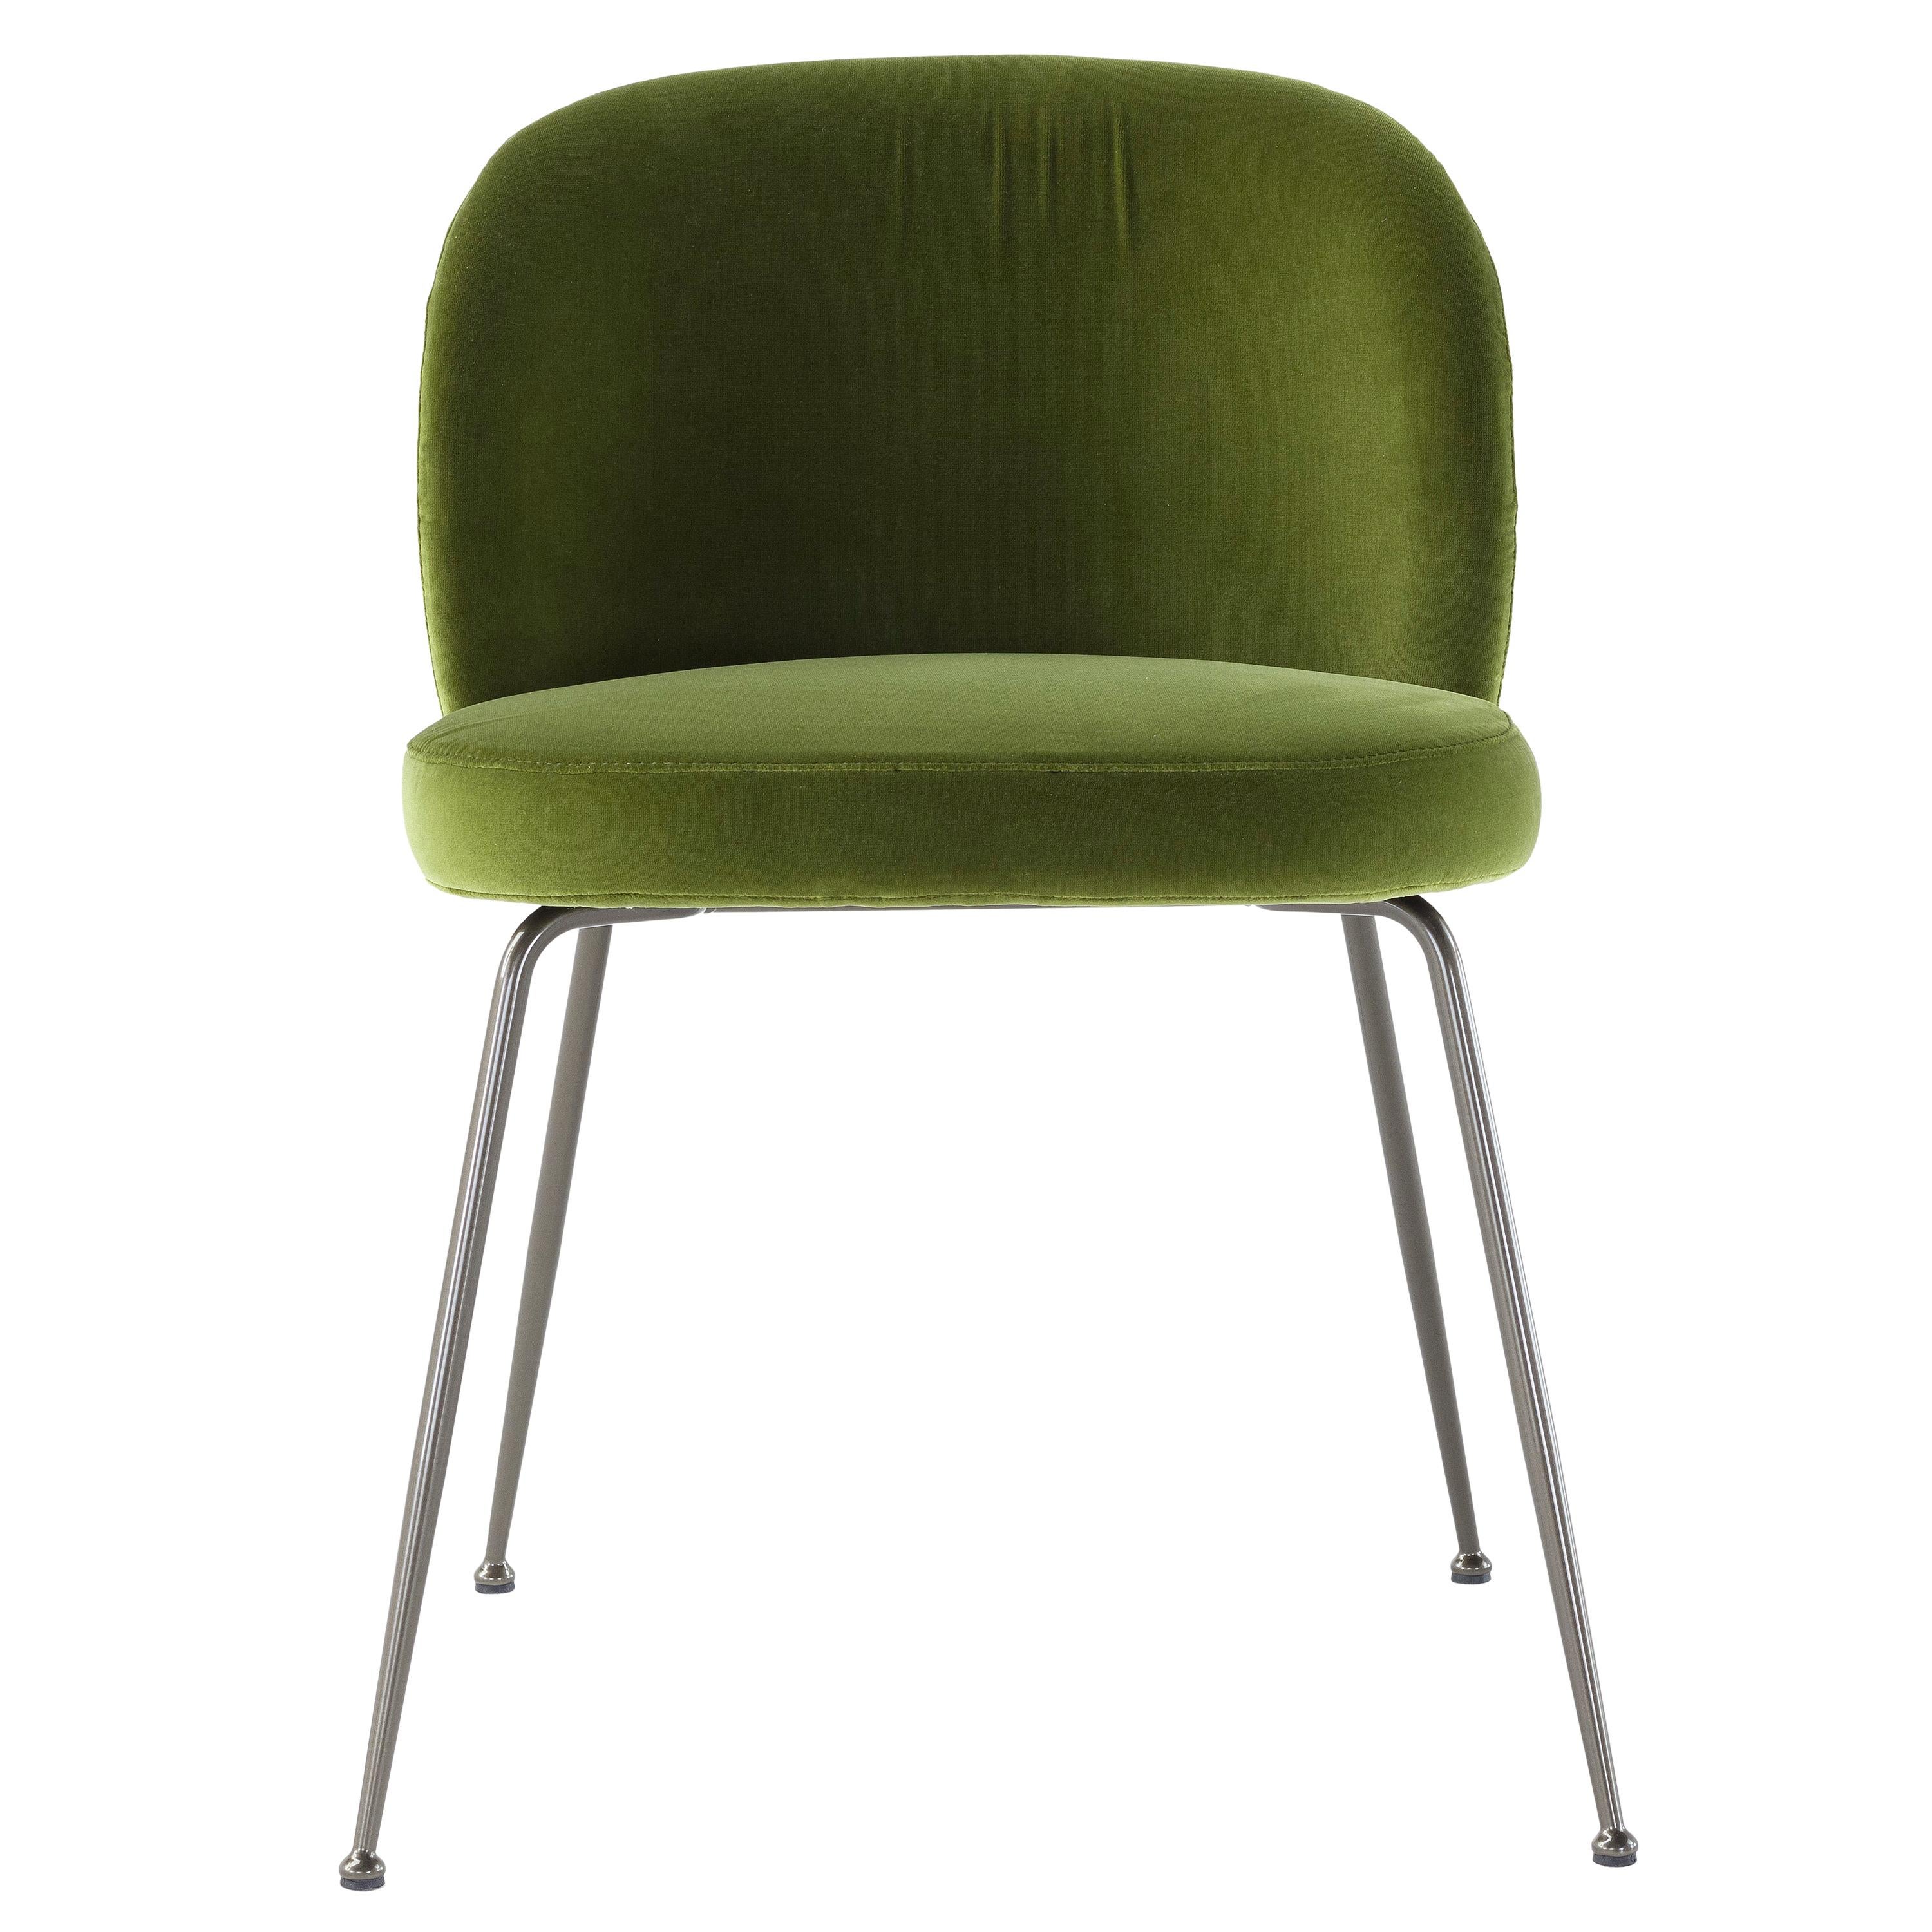 Amura Monnalisa Dining Chair in Green Velvet and Gunmetal Base by Amuralab For Sale